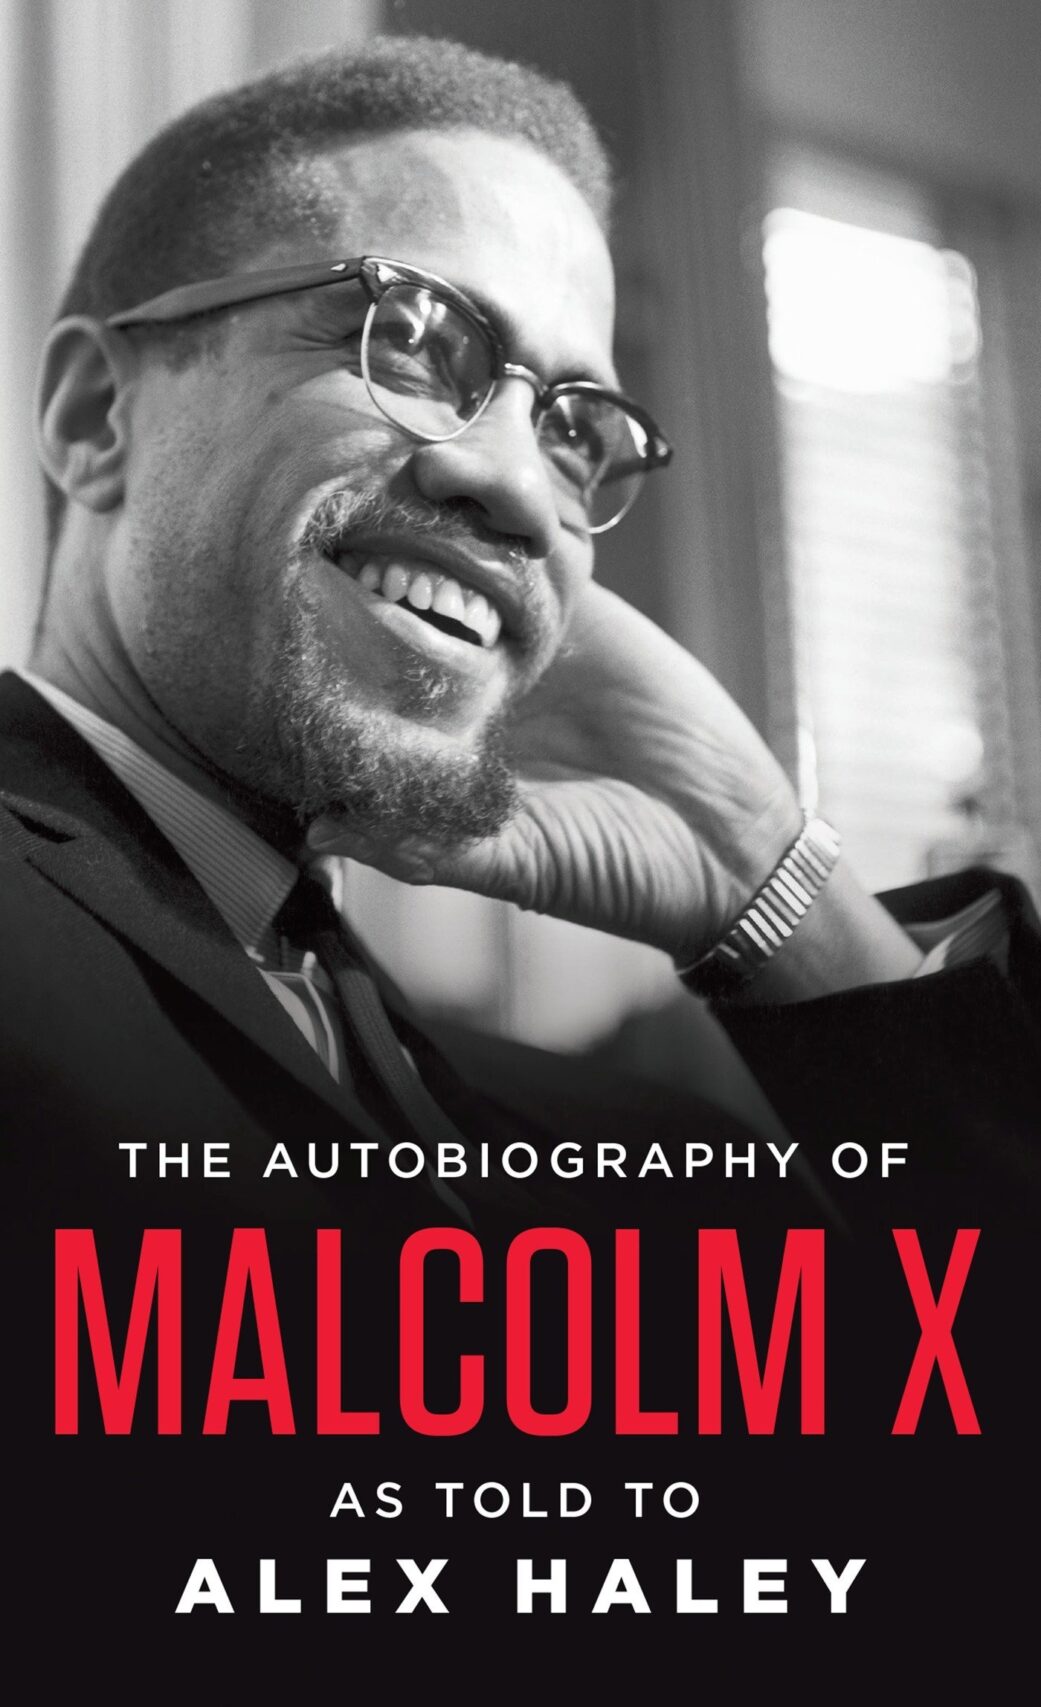 The Autobiography of Malcolm X by Alex haley